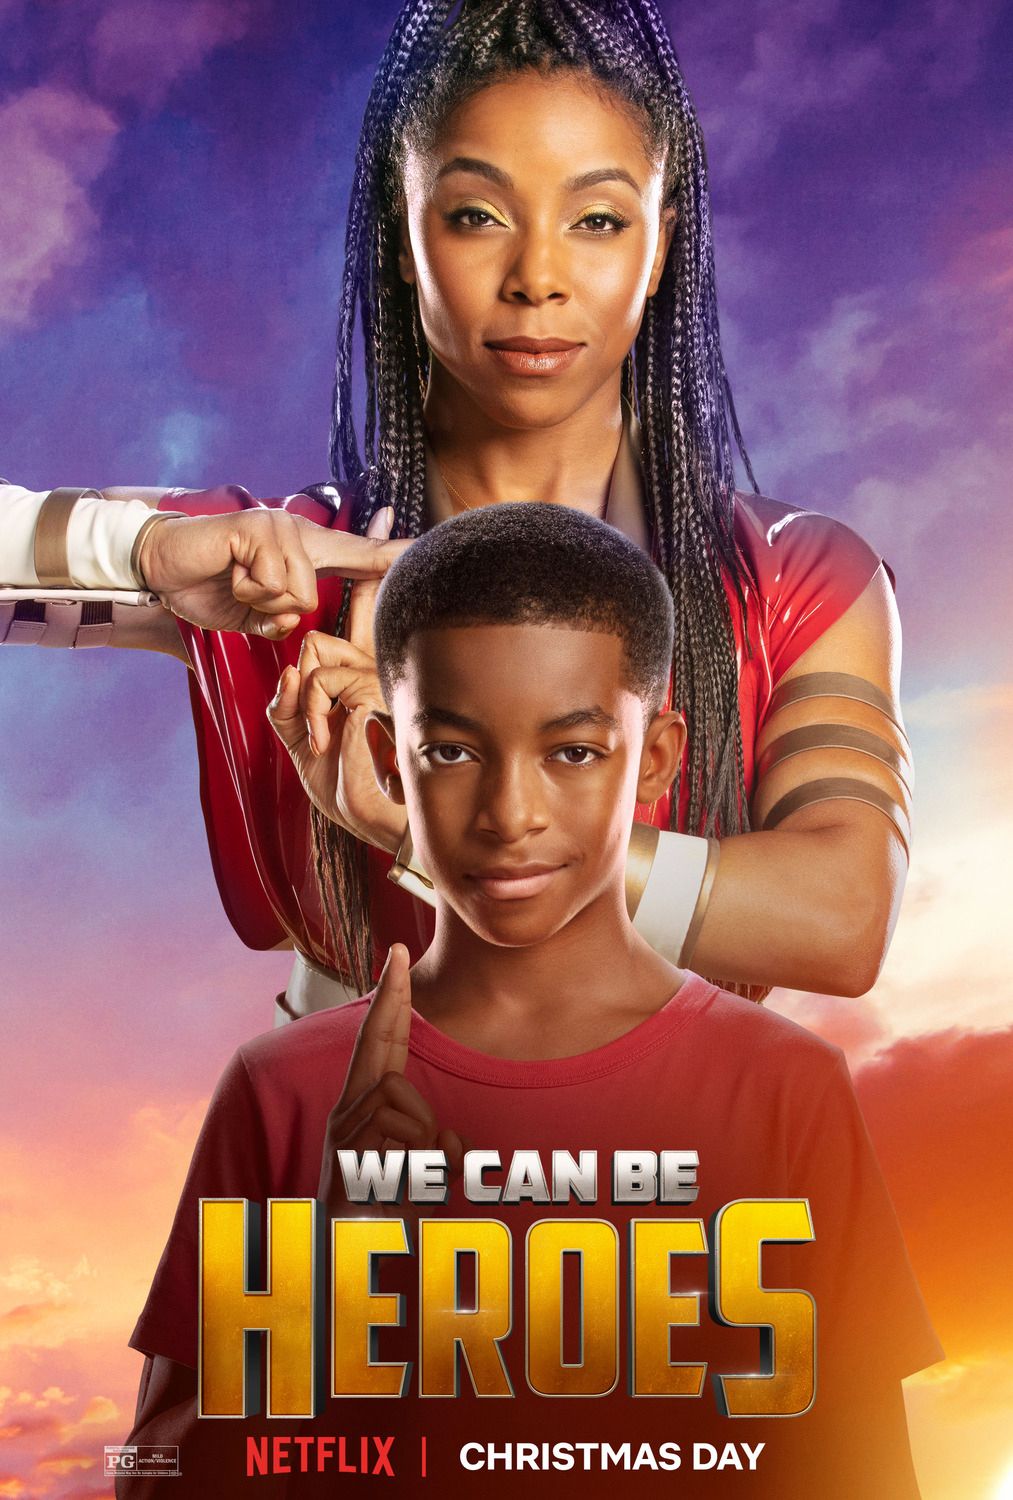 We Can Be Heroes Character Poster #5